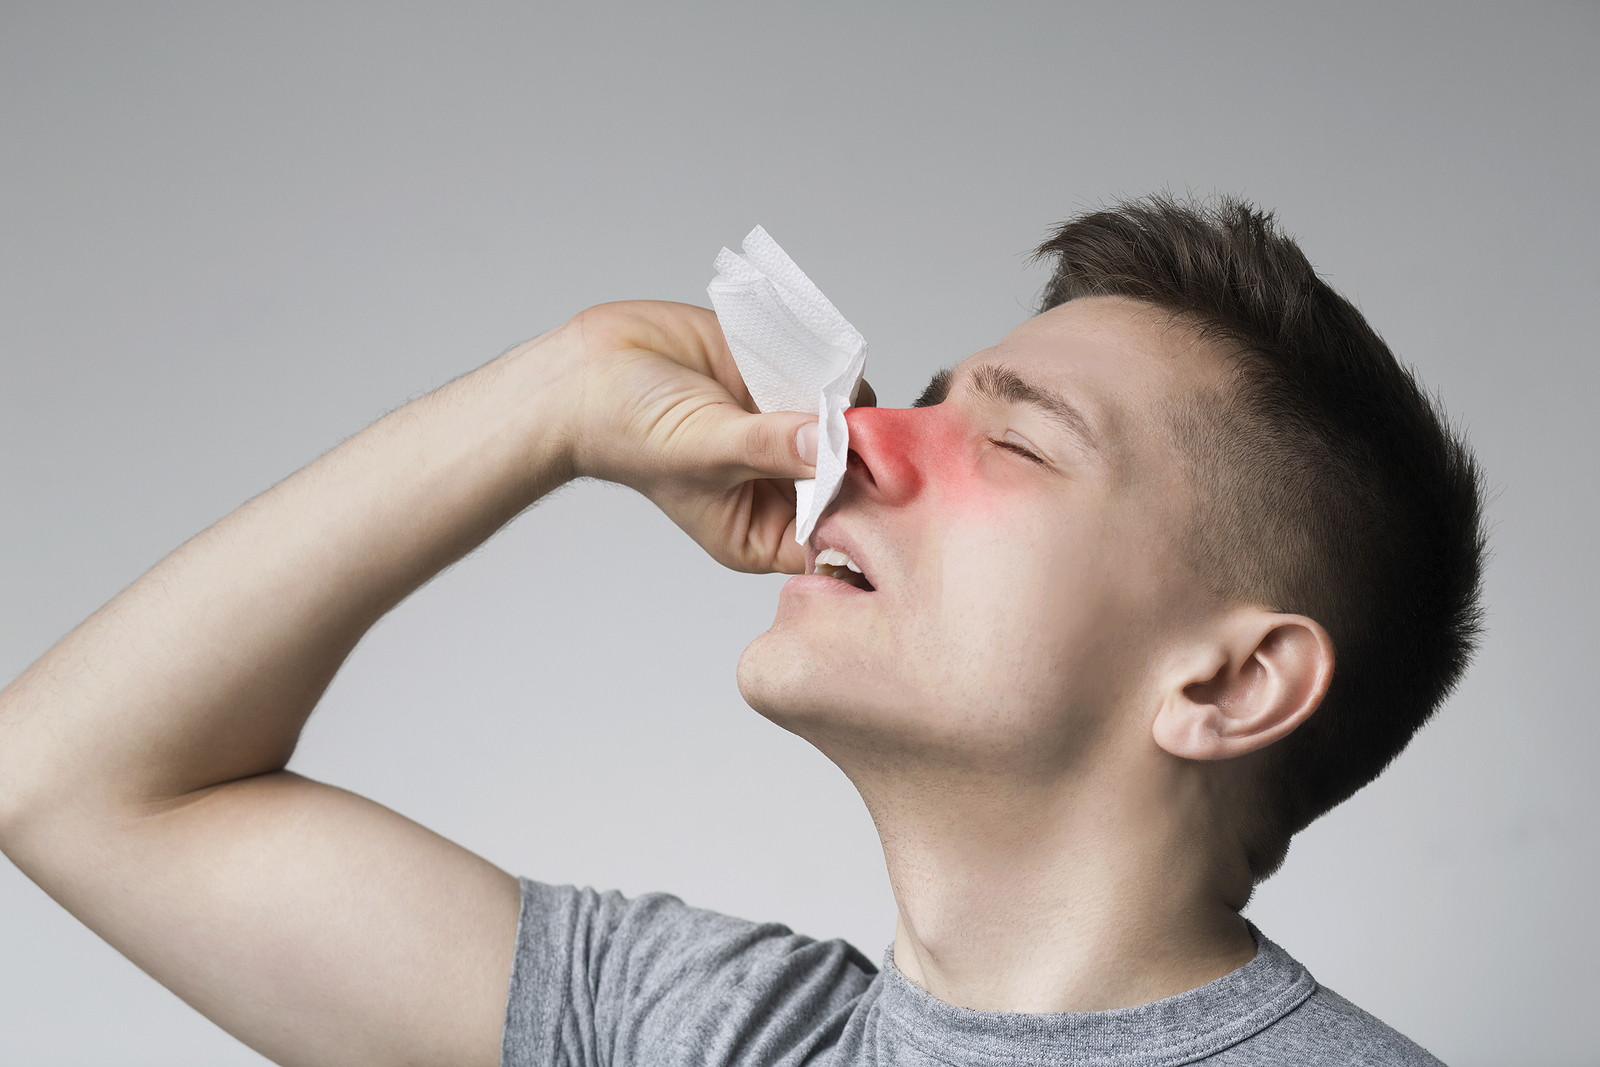 What to Do When You Have a Nosebleed